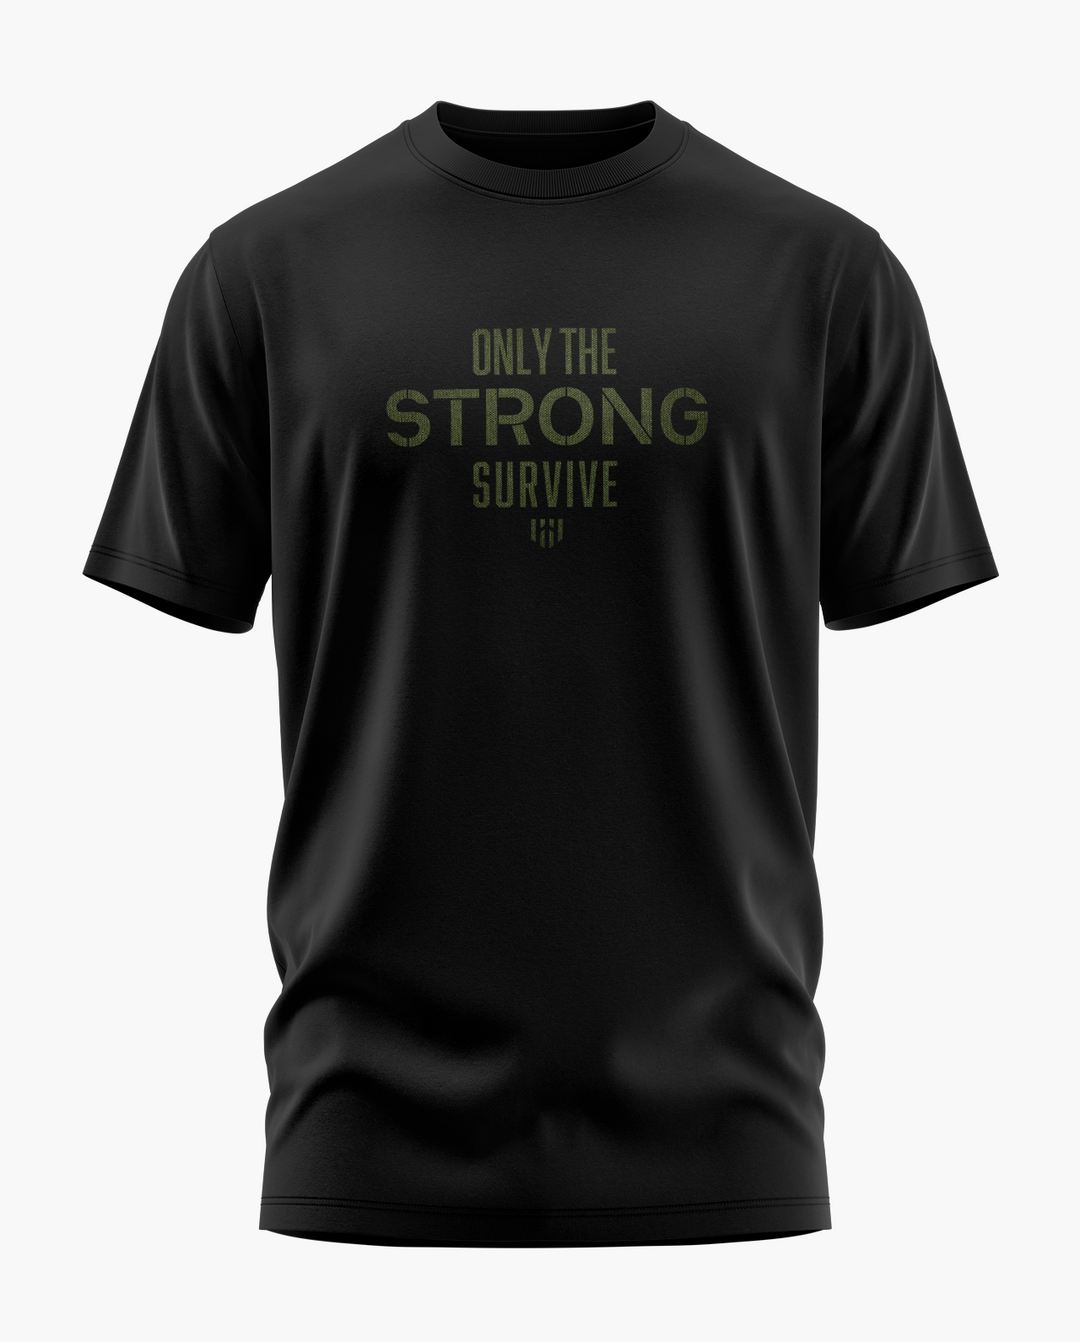 ONLY THE STRONG SURVIVE T-Shirt